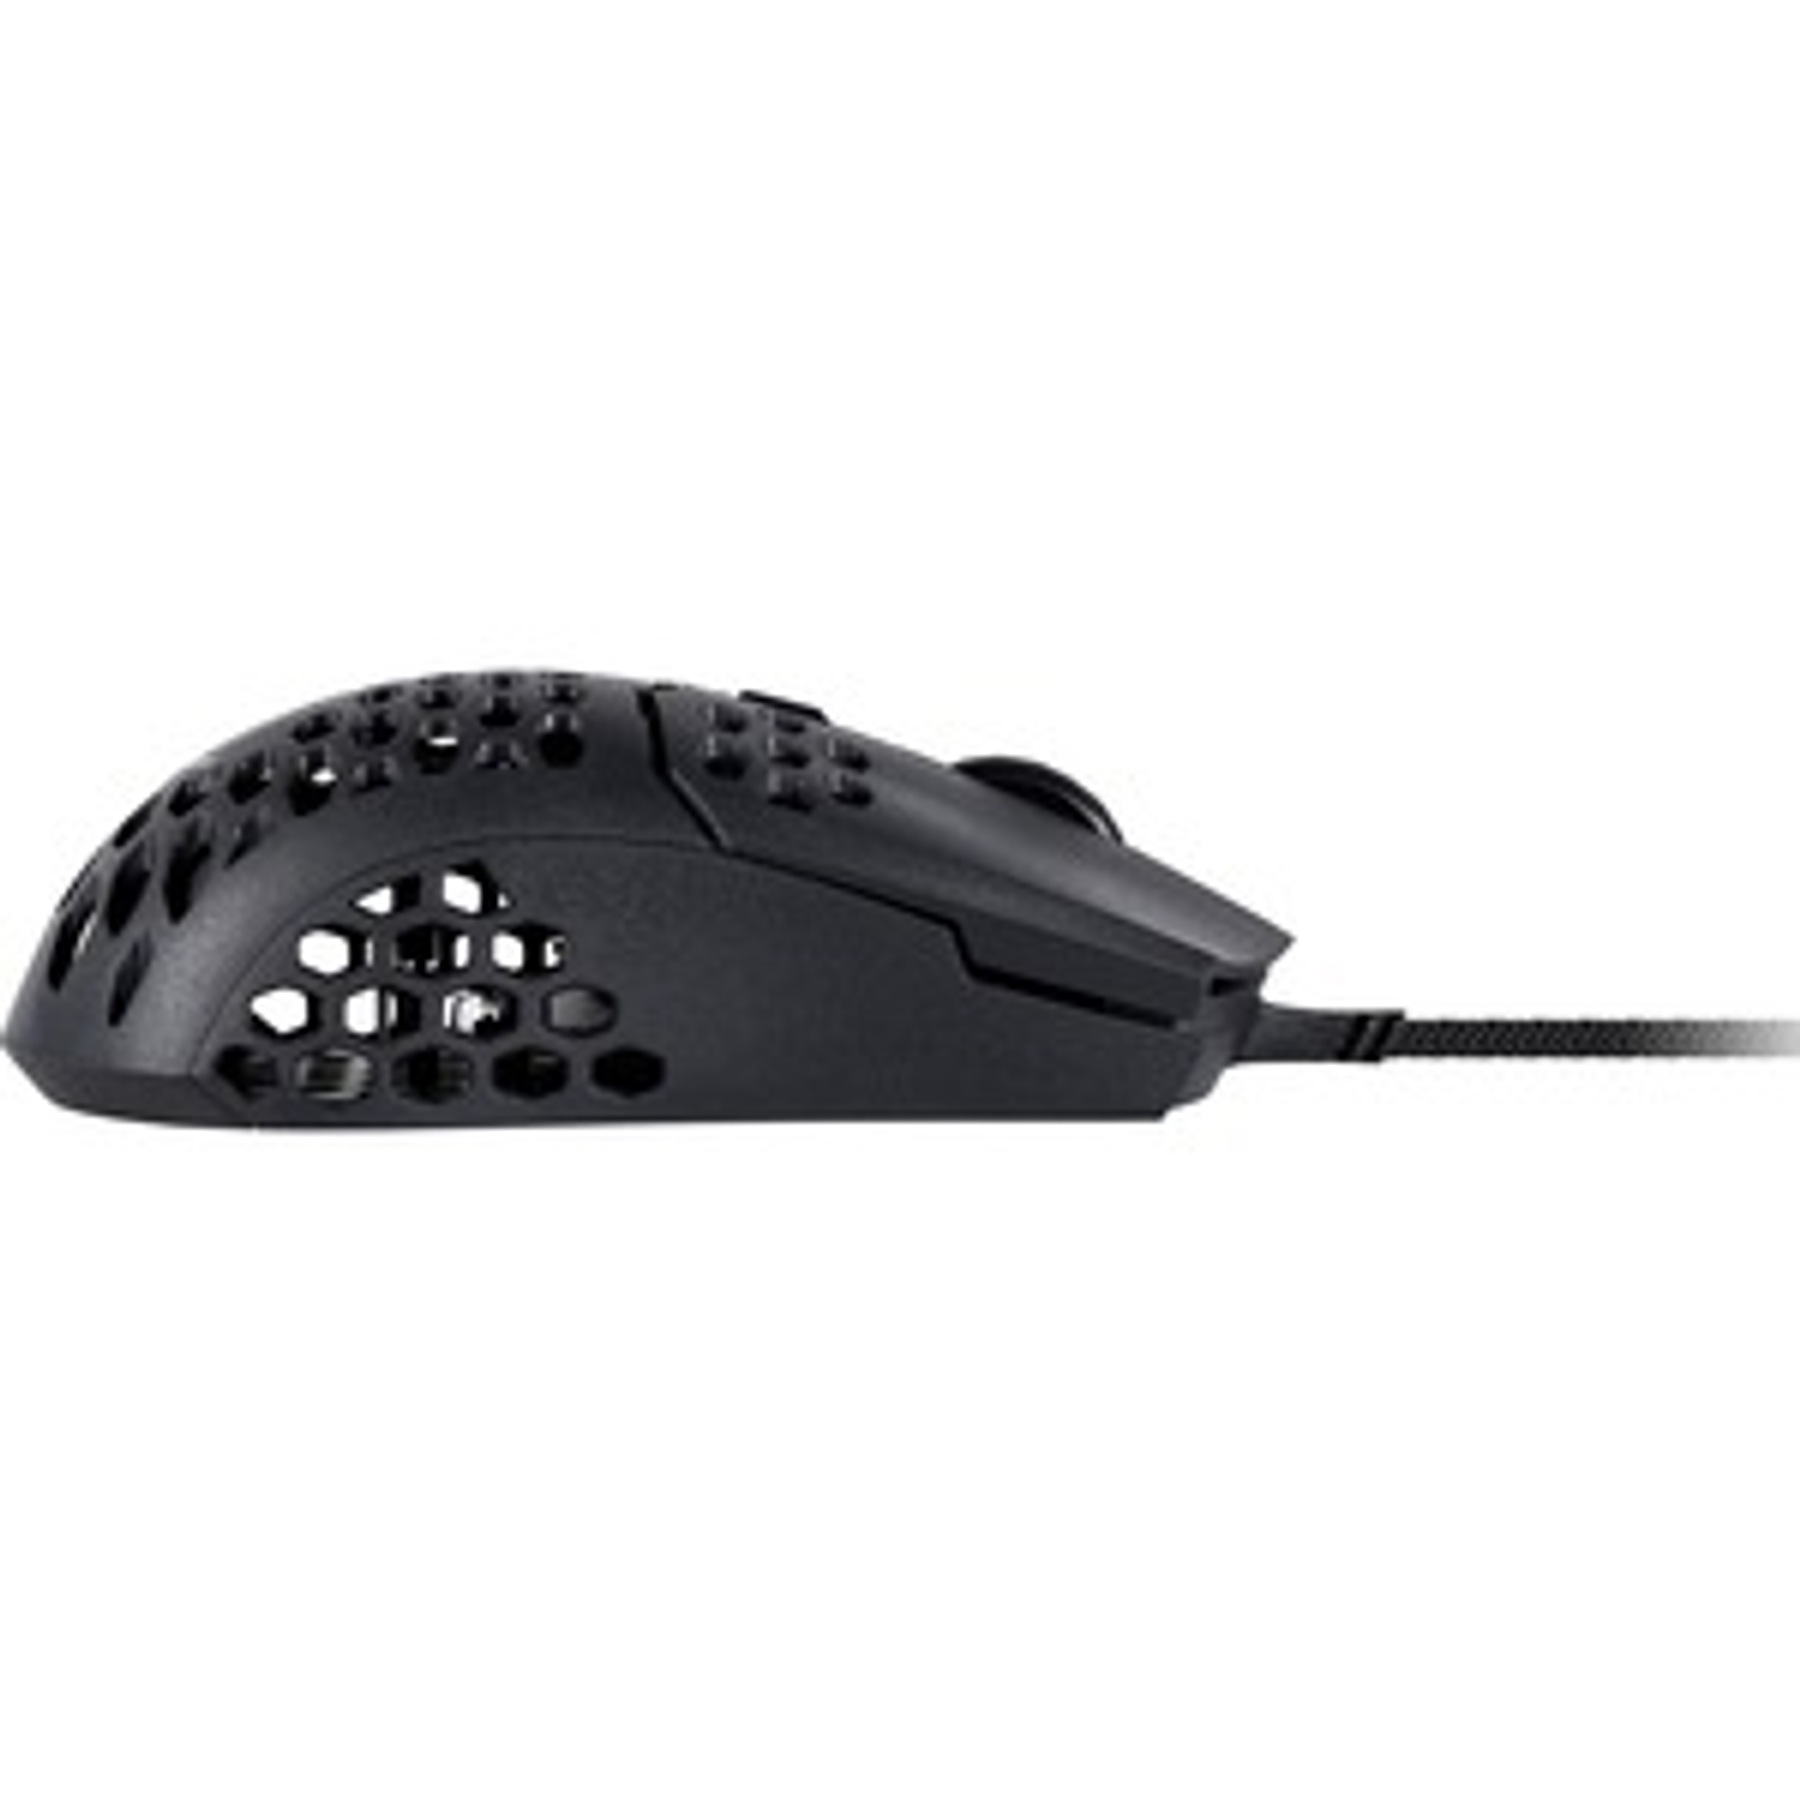 Cooler Master mouse MM710 black glossy